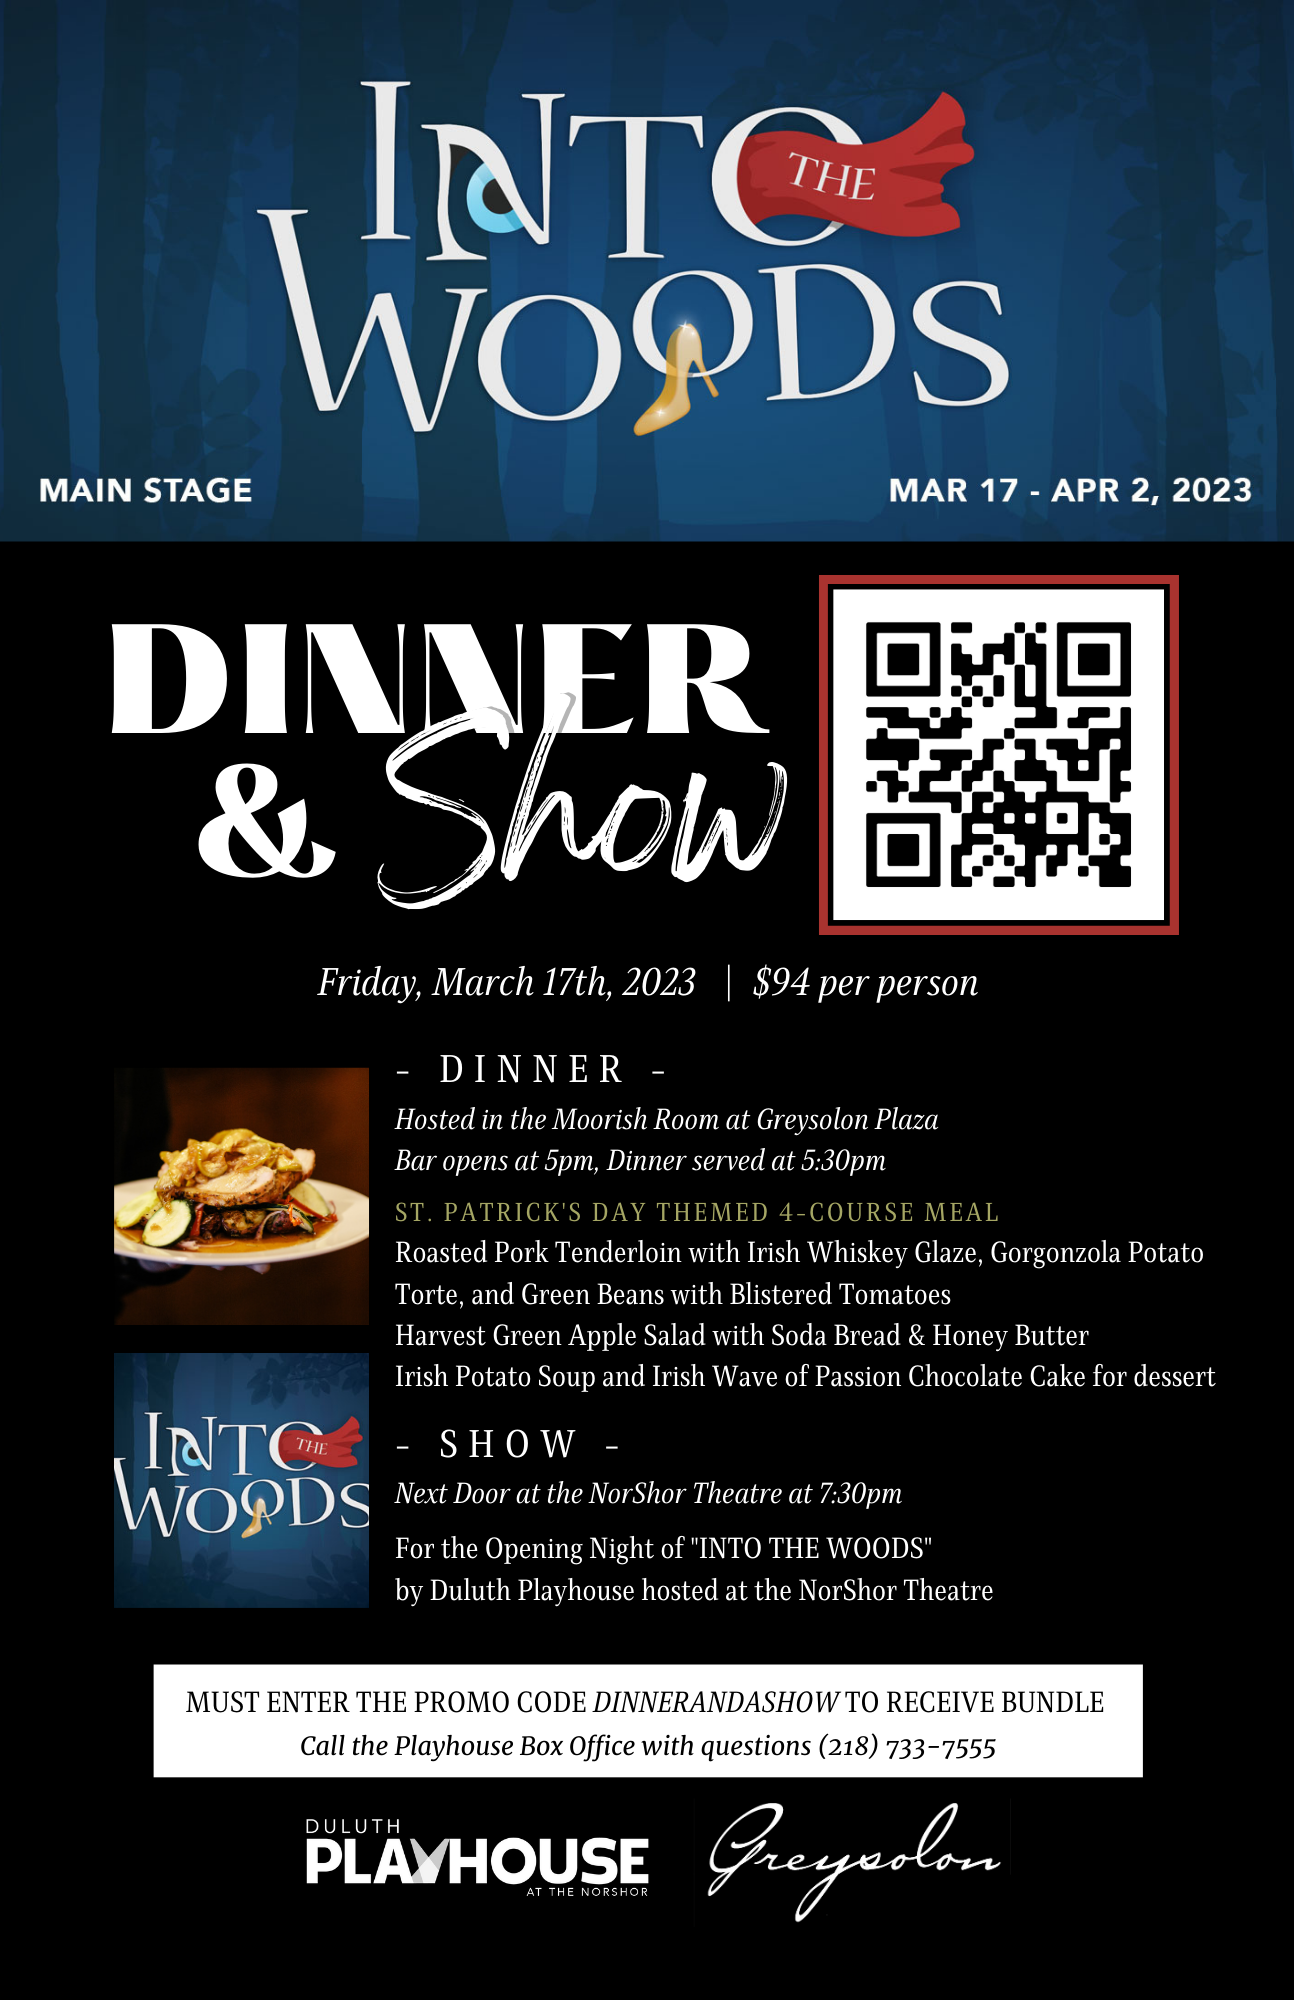 Dinner & A Show with Greysolon: Into the Woods at NorShor Theatre